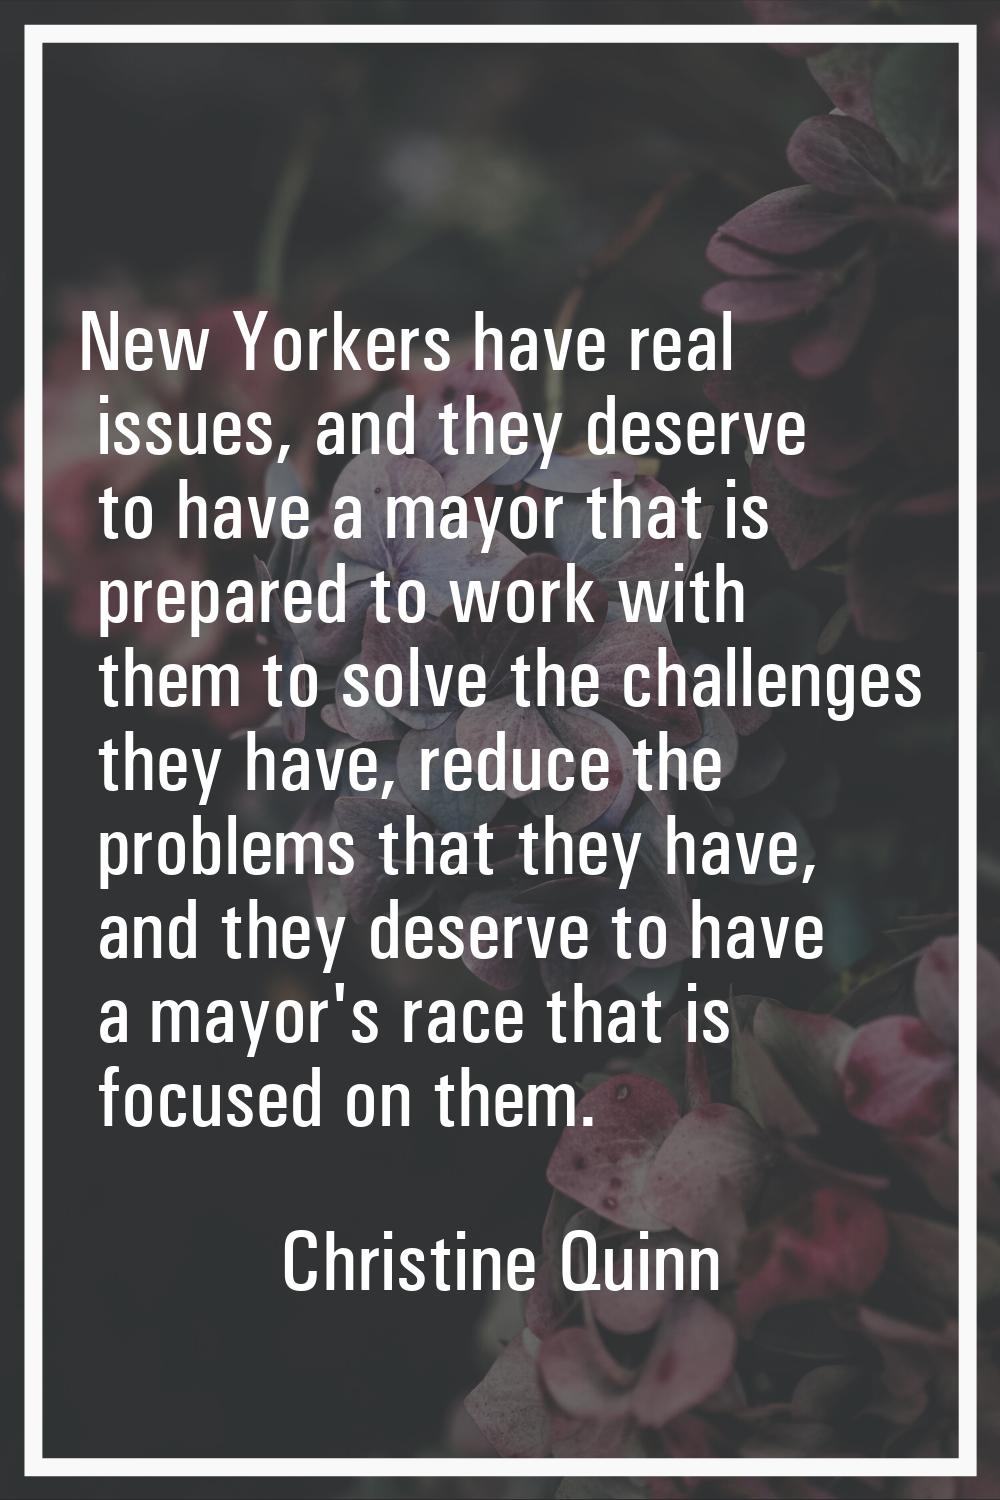 New Yorkers have real issues, and they deserve to have a mayor that is prepared to work with them t